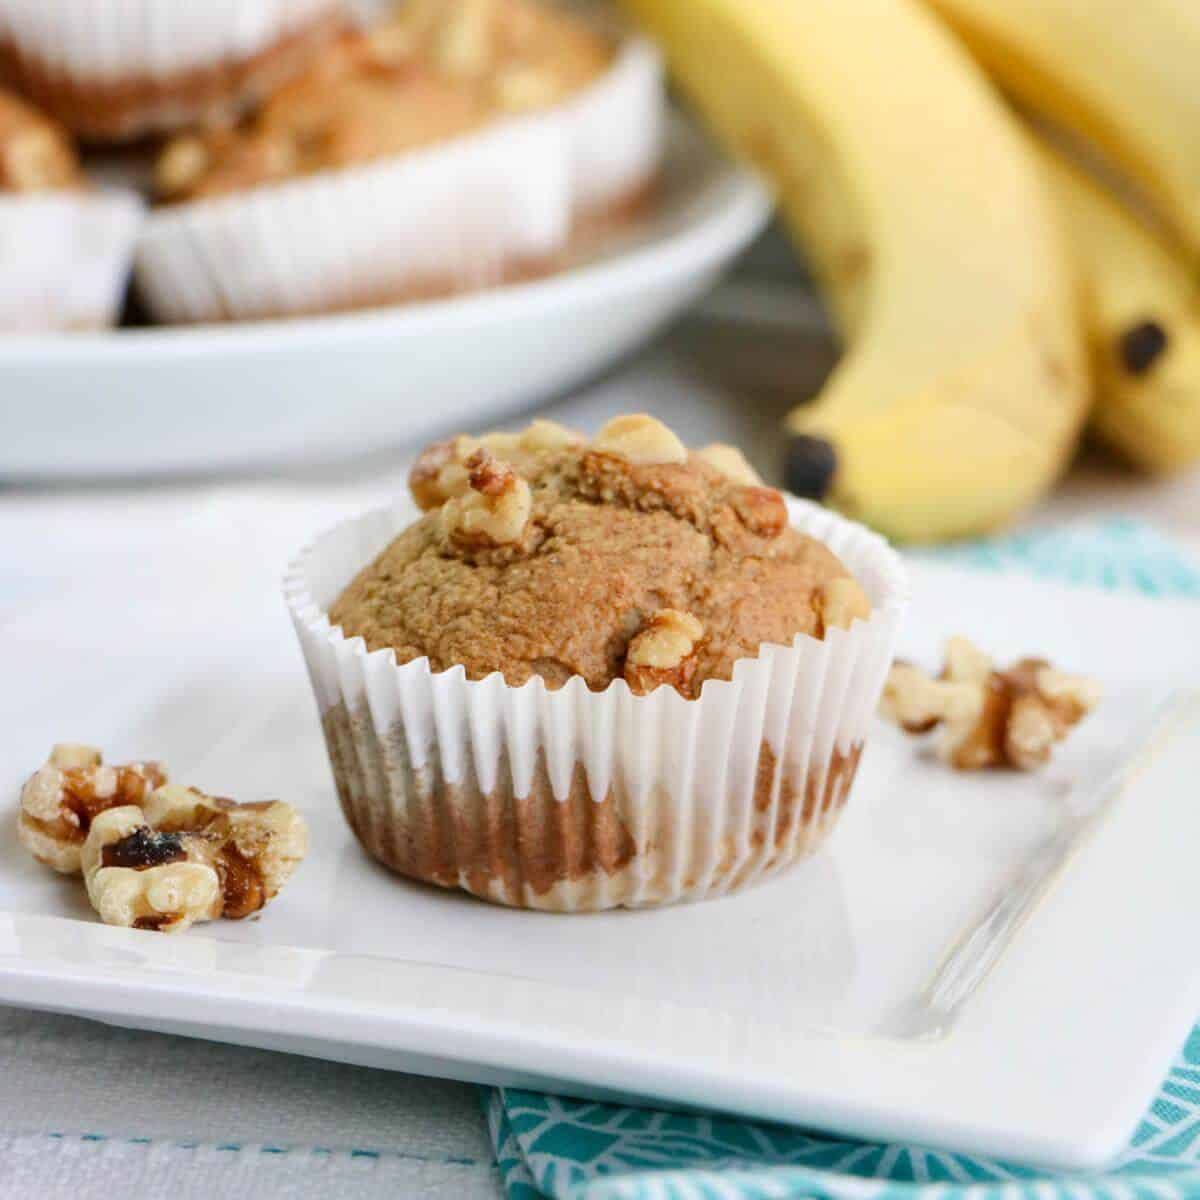 Banana oat muffins on a white square plate.